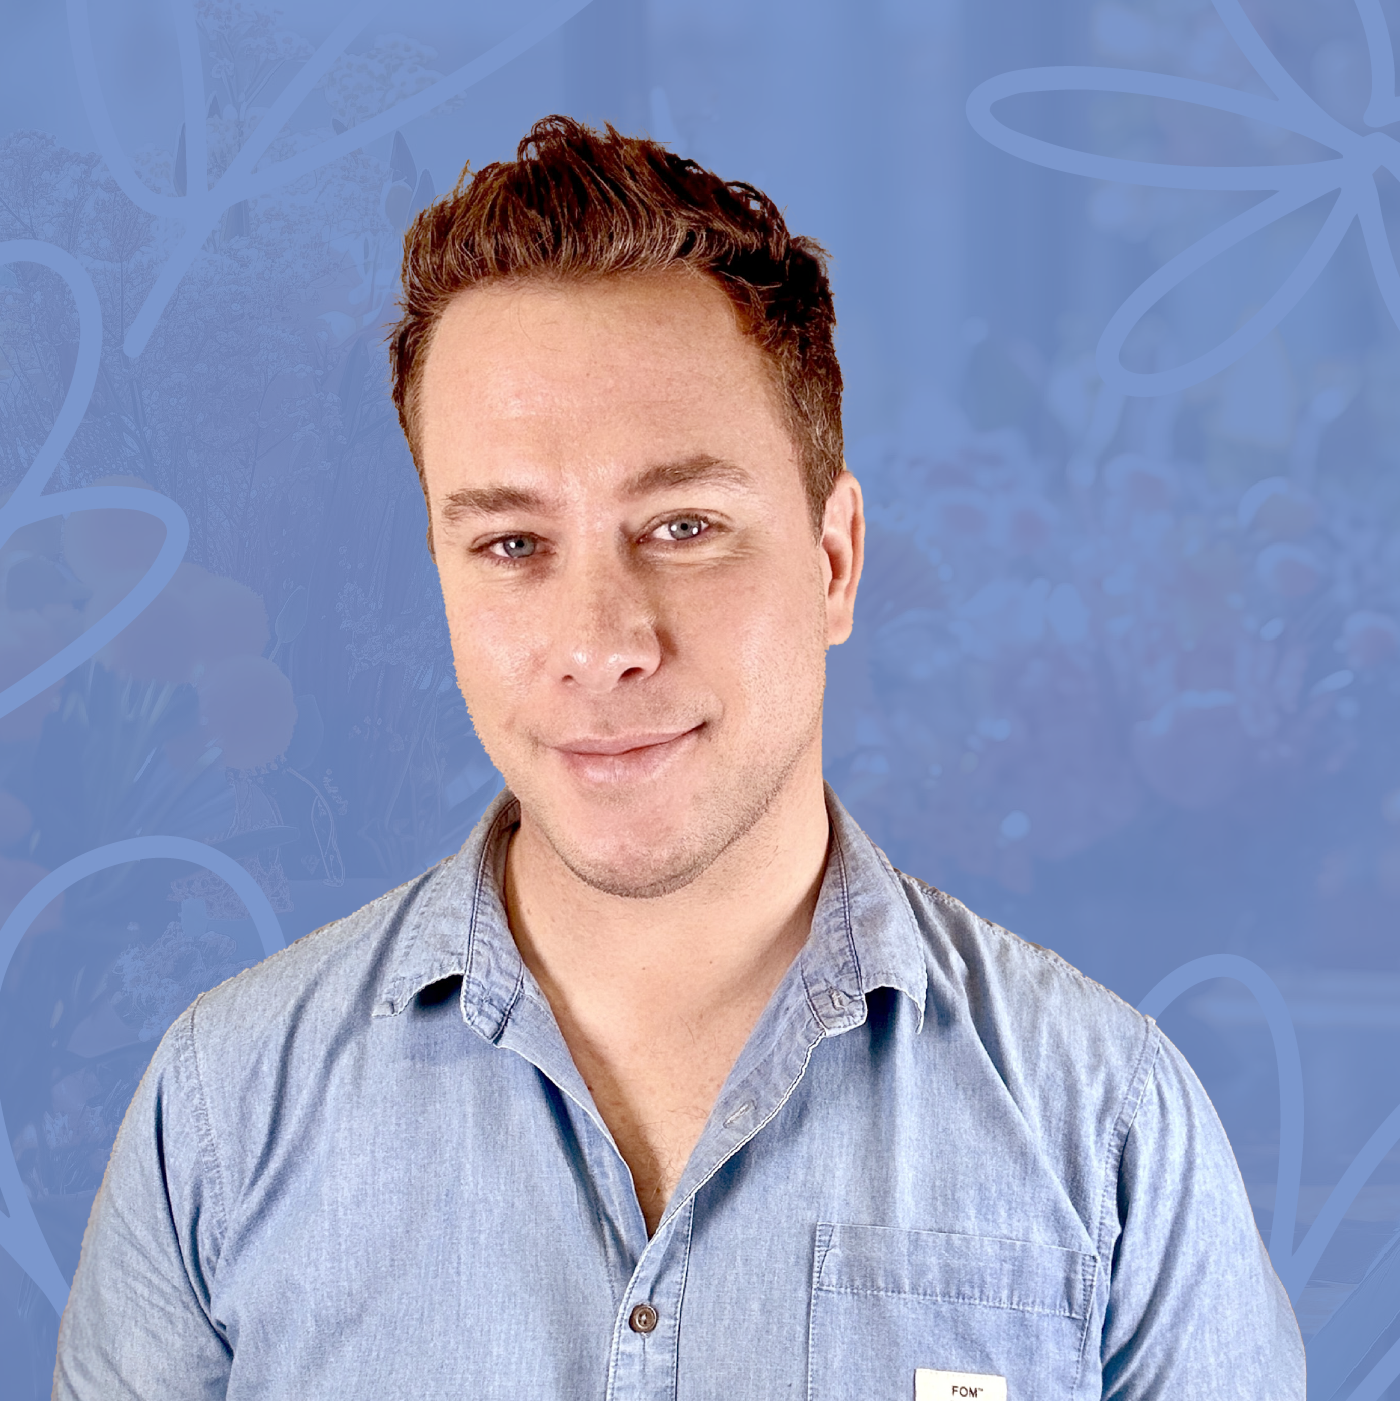 Portrait of Nicholas James, team member at Fabulous Flowers, smiling in a light blue button-up shirt against a blue background with floral designs. MEET THE TEAM at Fabulous Flowers and Gifts. Connect with Nicholas for expert floral and gift advice.